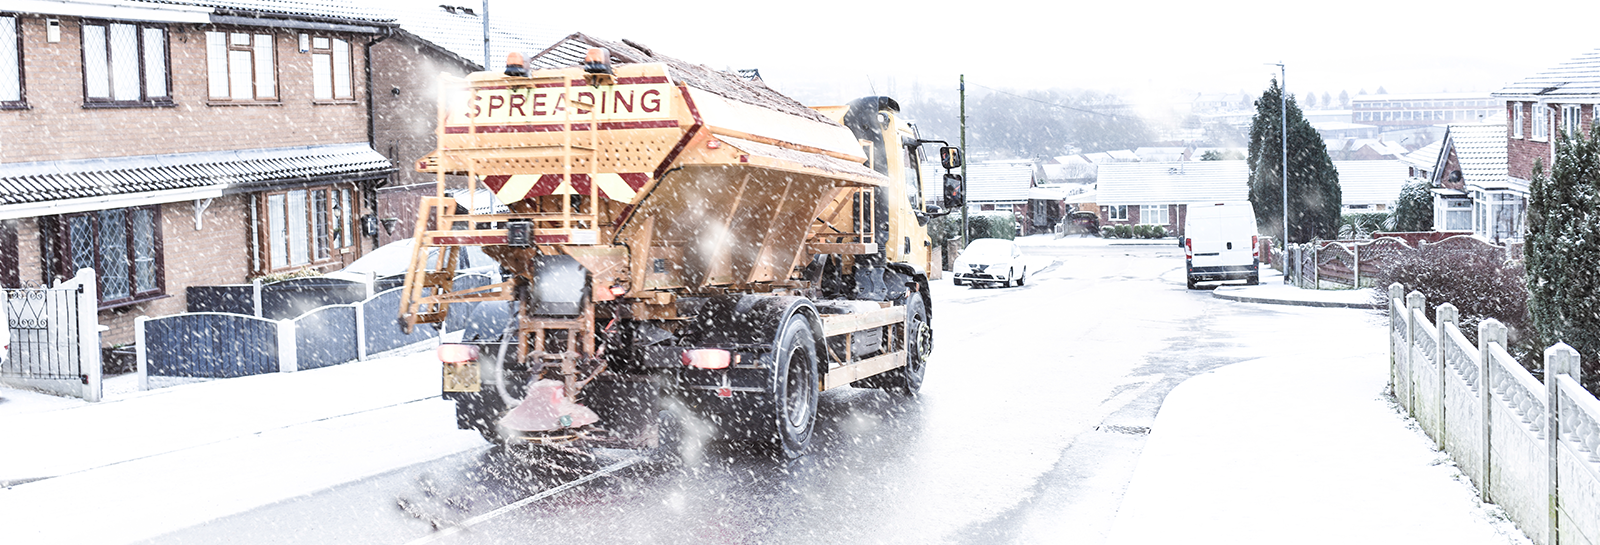 Gritting lorry on snowy road banner image